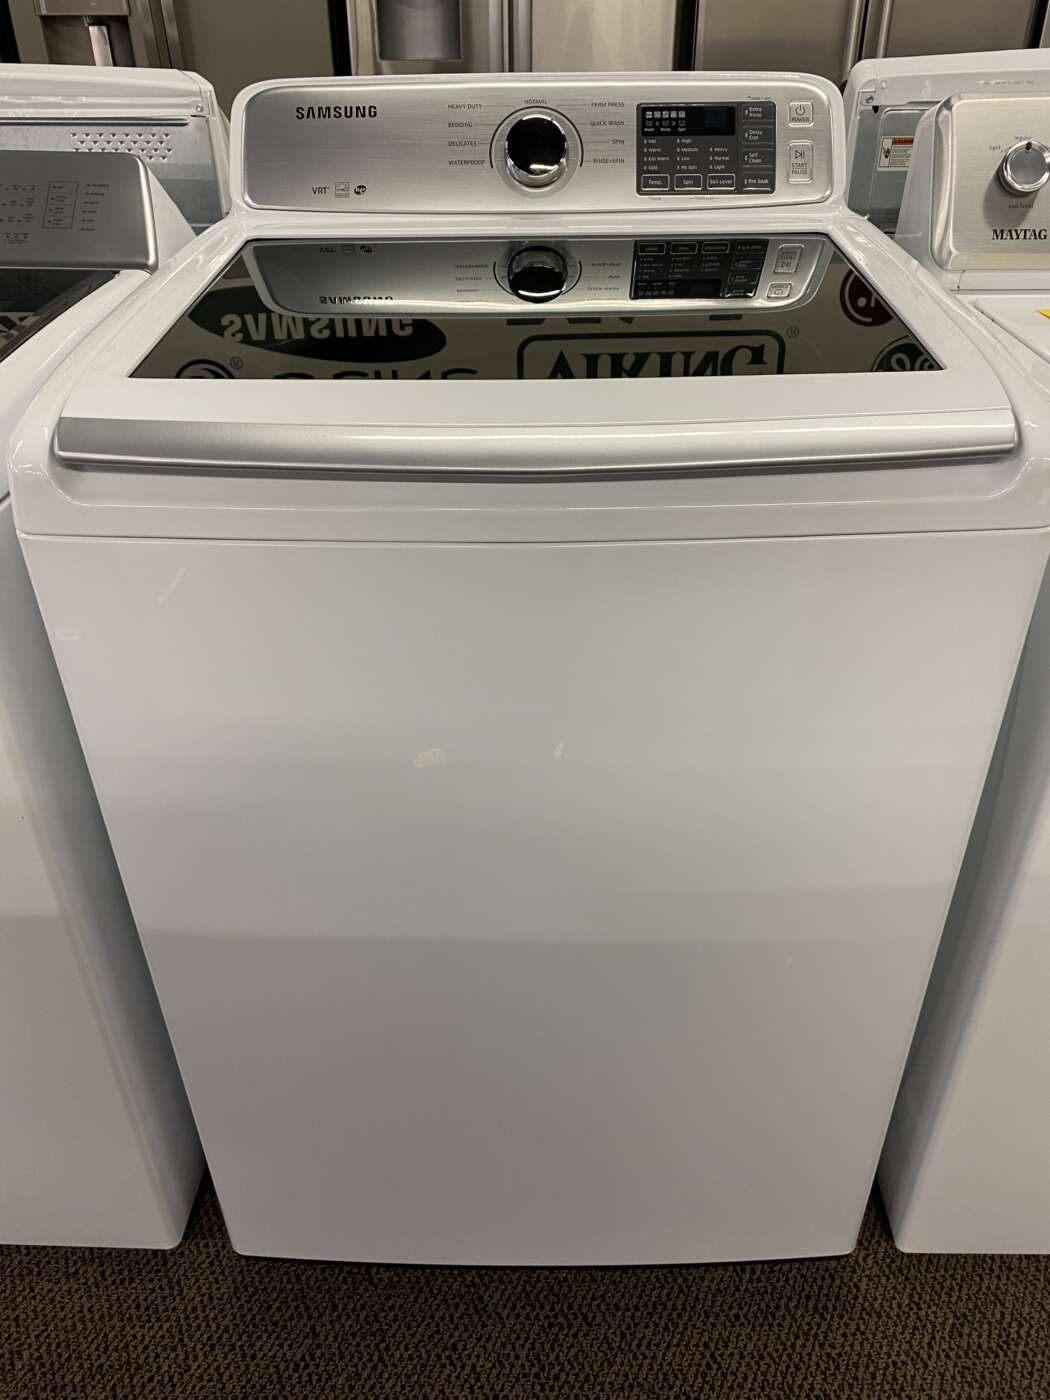 Reconditioned SAMSUNG 4.5 Cu. Ft. Top-Load H/E Washer – White